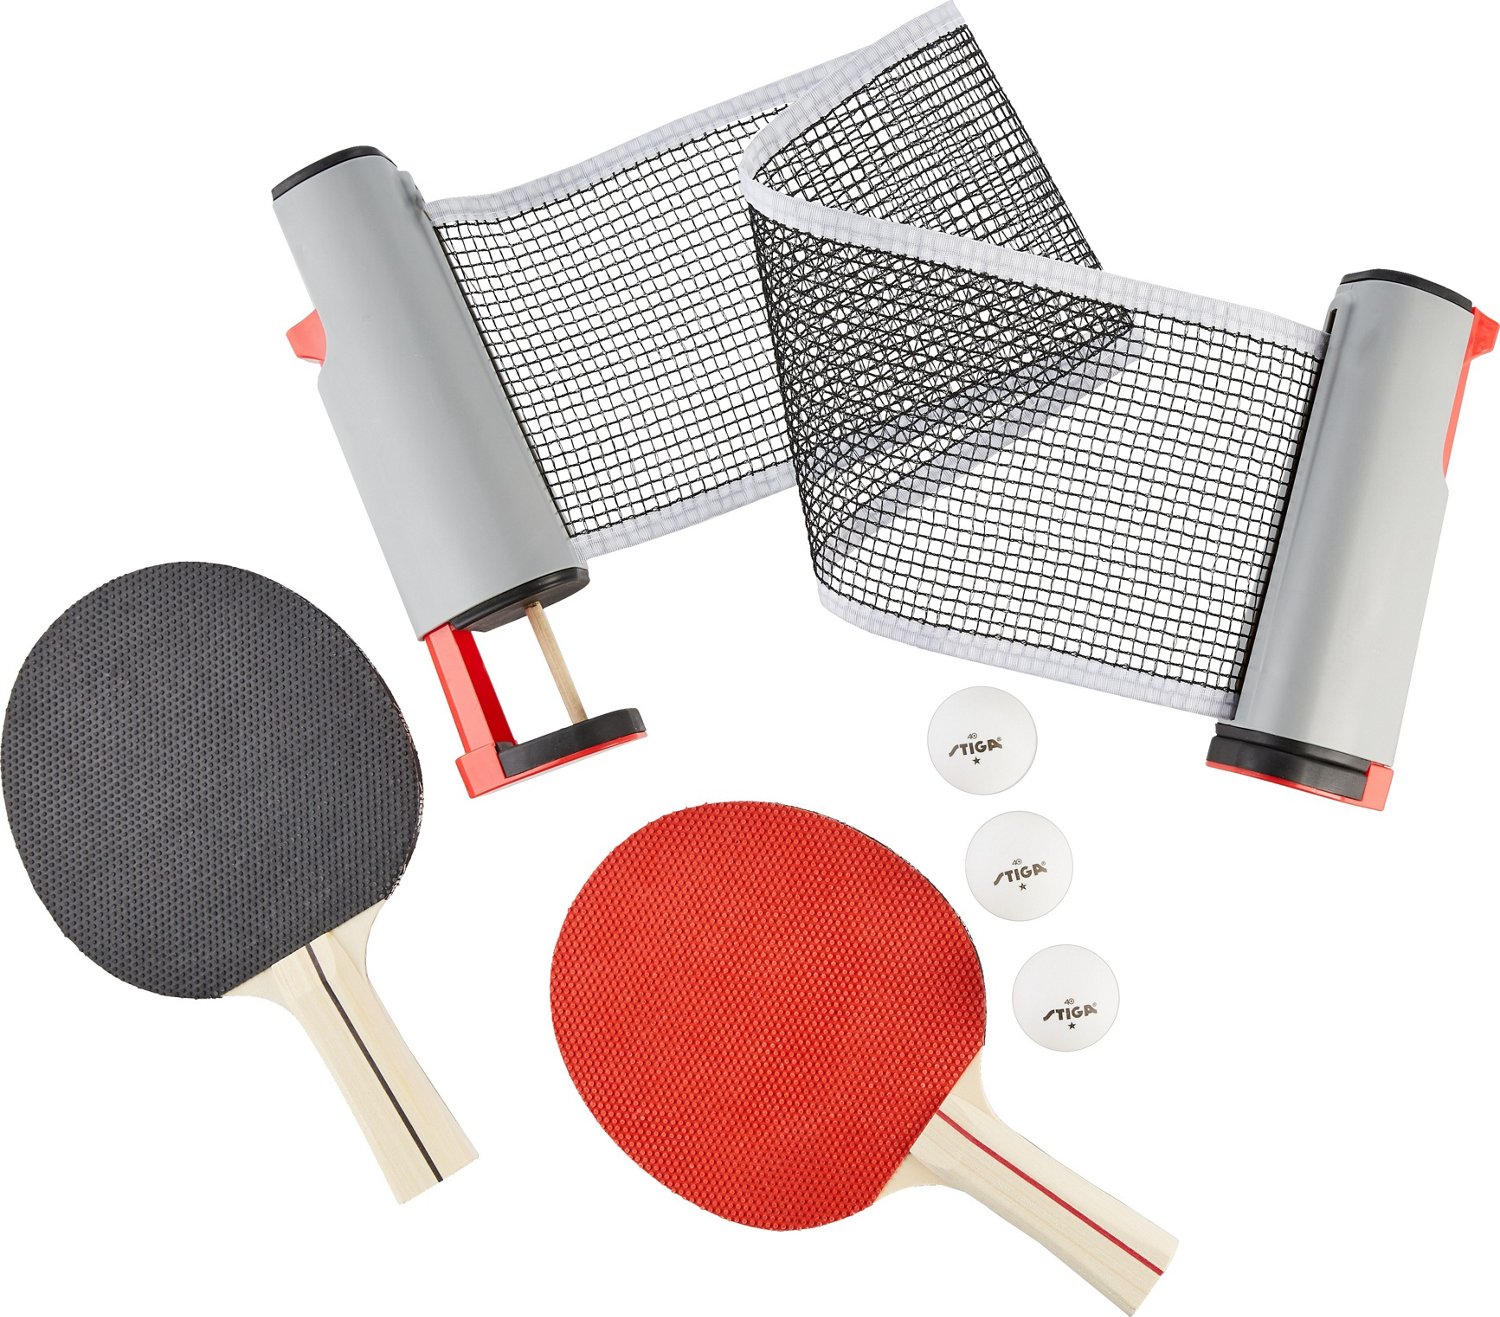 Ping Pong Paddle Set Ping Pong Paddle Set Including 3 Table Tennis US STOCK Z4W8 